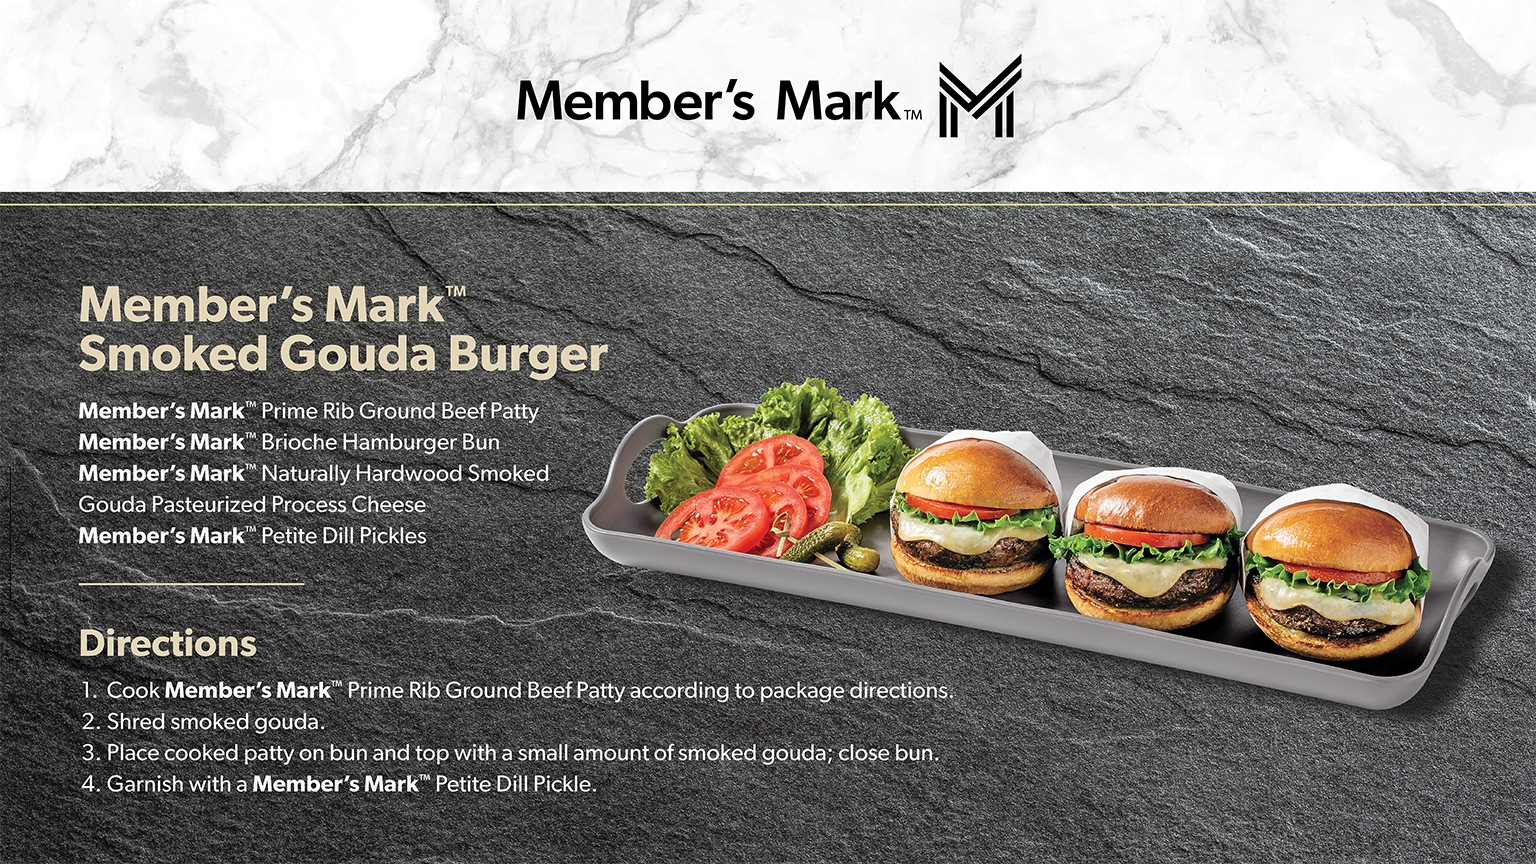 Ingredients and recipe for Member’s Mark Smoked Gouda Burger.